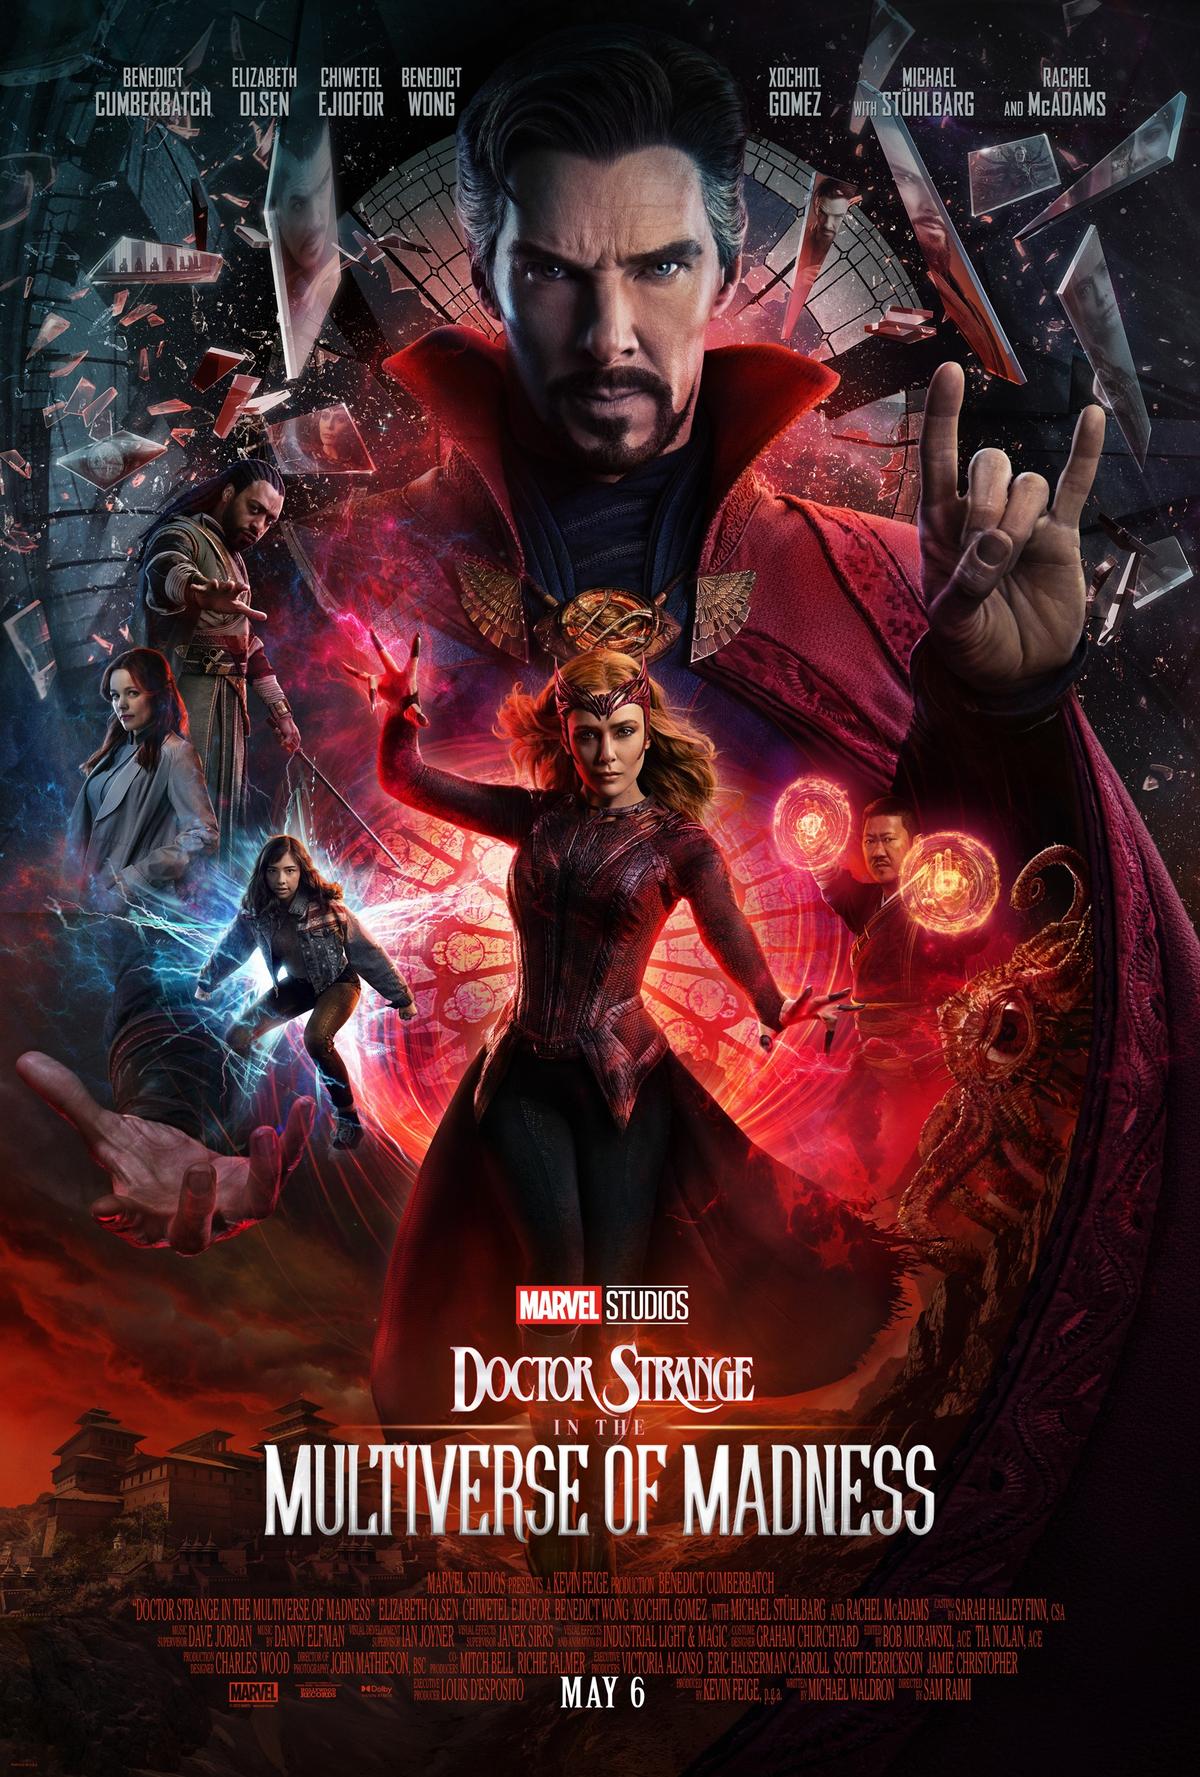 Movie poster of "Doctor Strange in the Multiverse of Madness." (Marvel Studios)